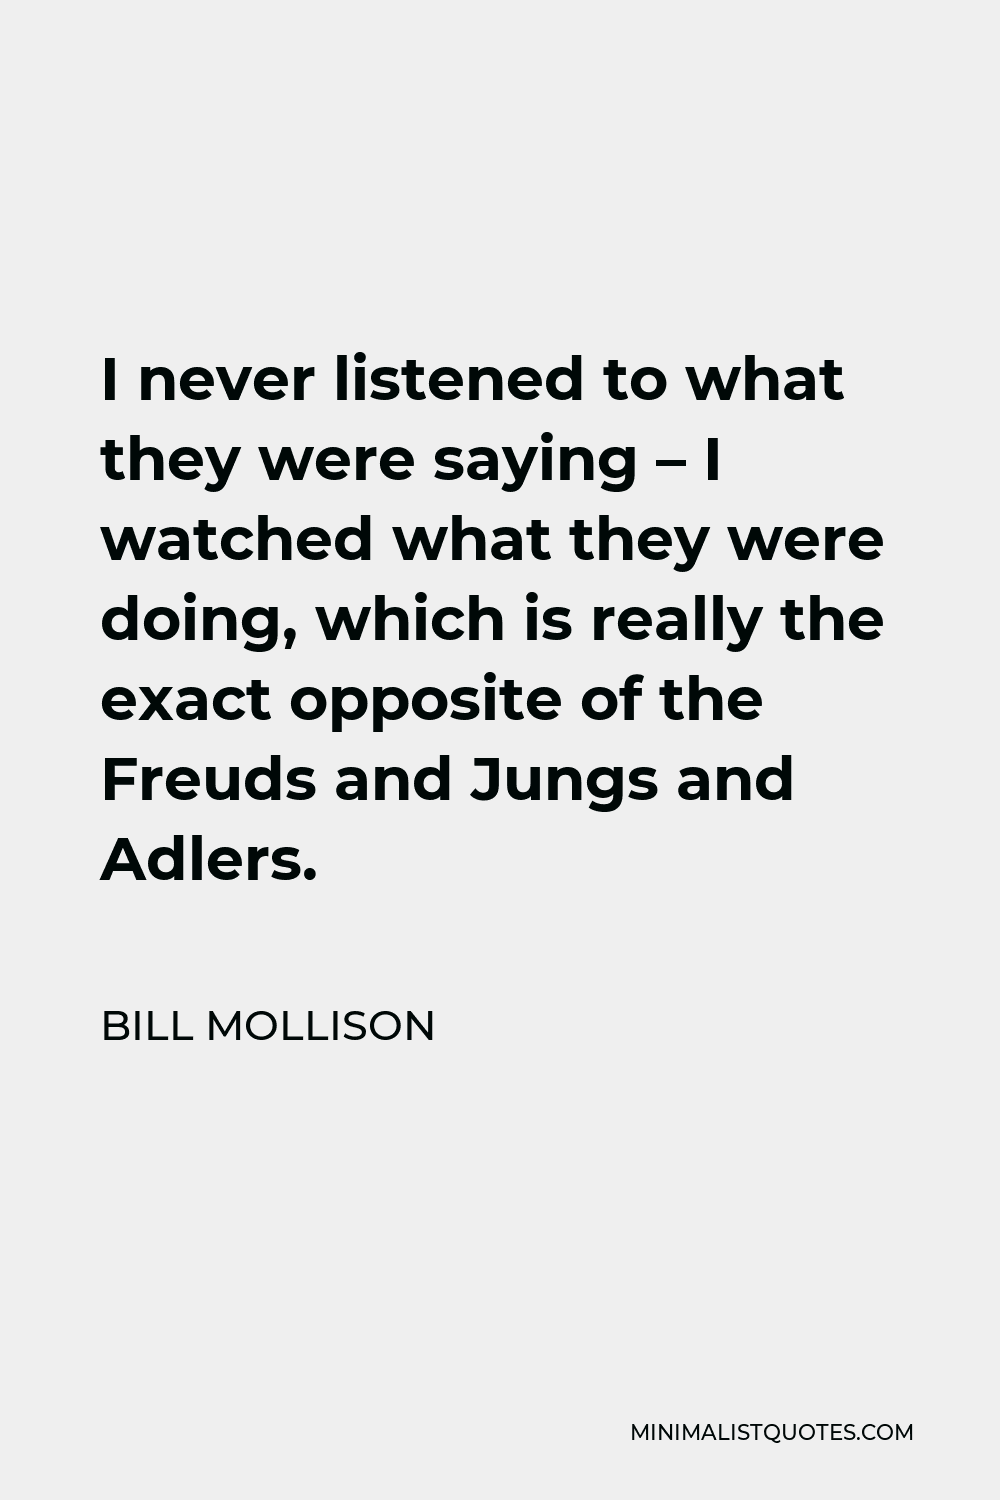 Bill Mollison Quote - I never listened to what they were saying – I watched what they were doing, which is really the exact opposite of the Freuds and Jungs and Adlers.